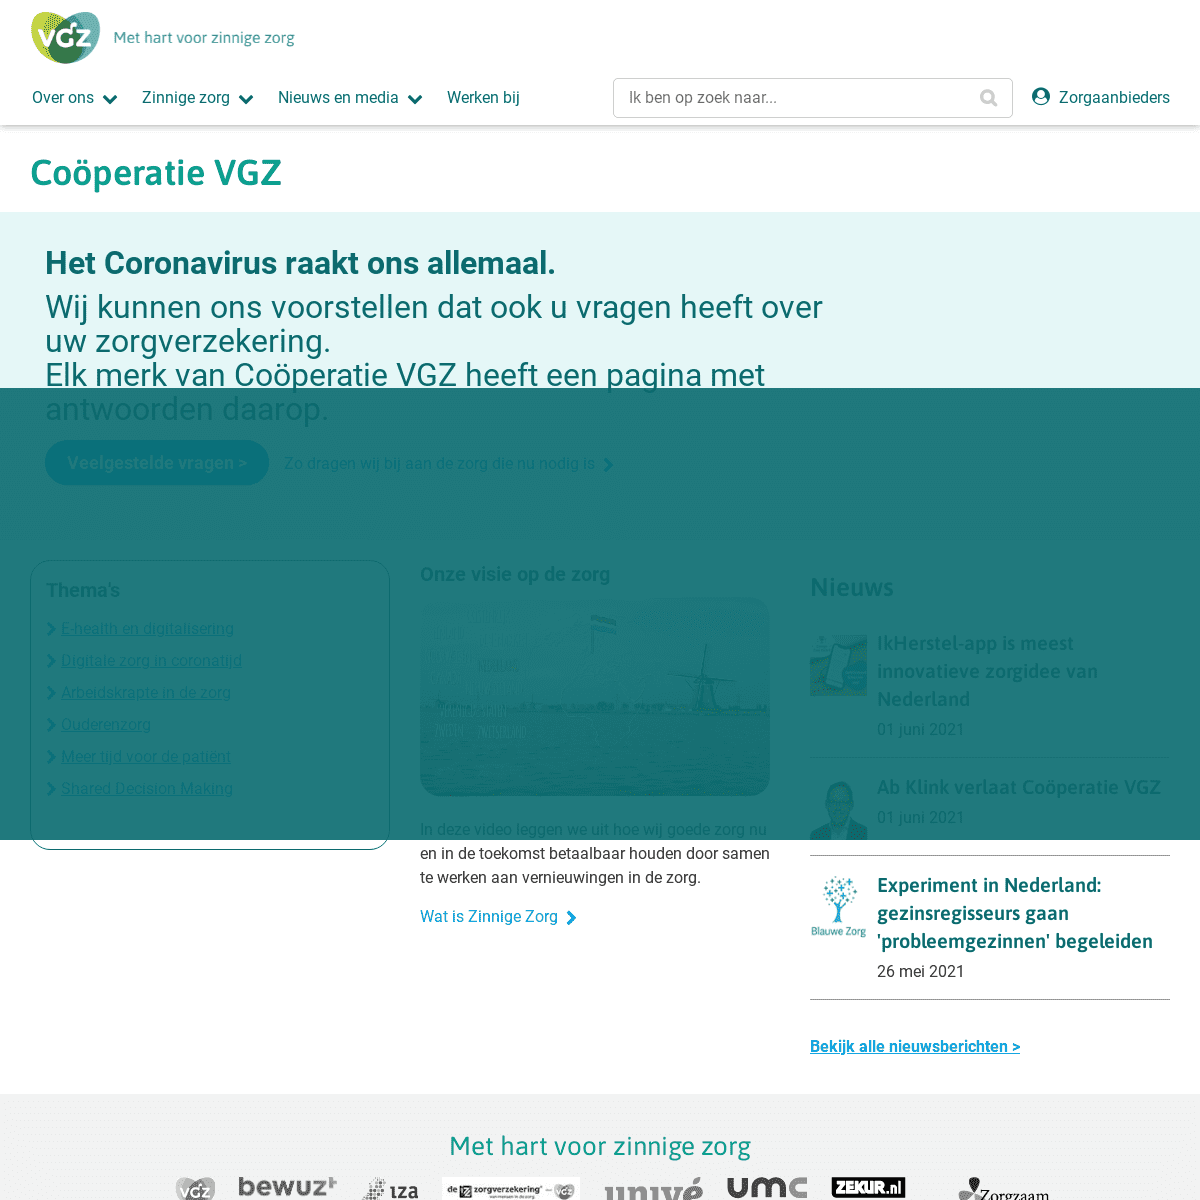 A complete backup of https://cooperatievgz.nl